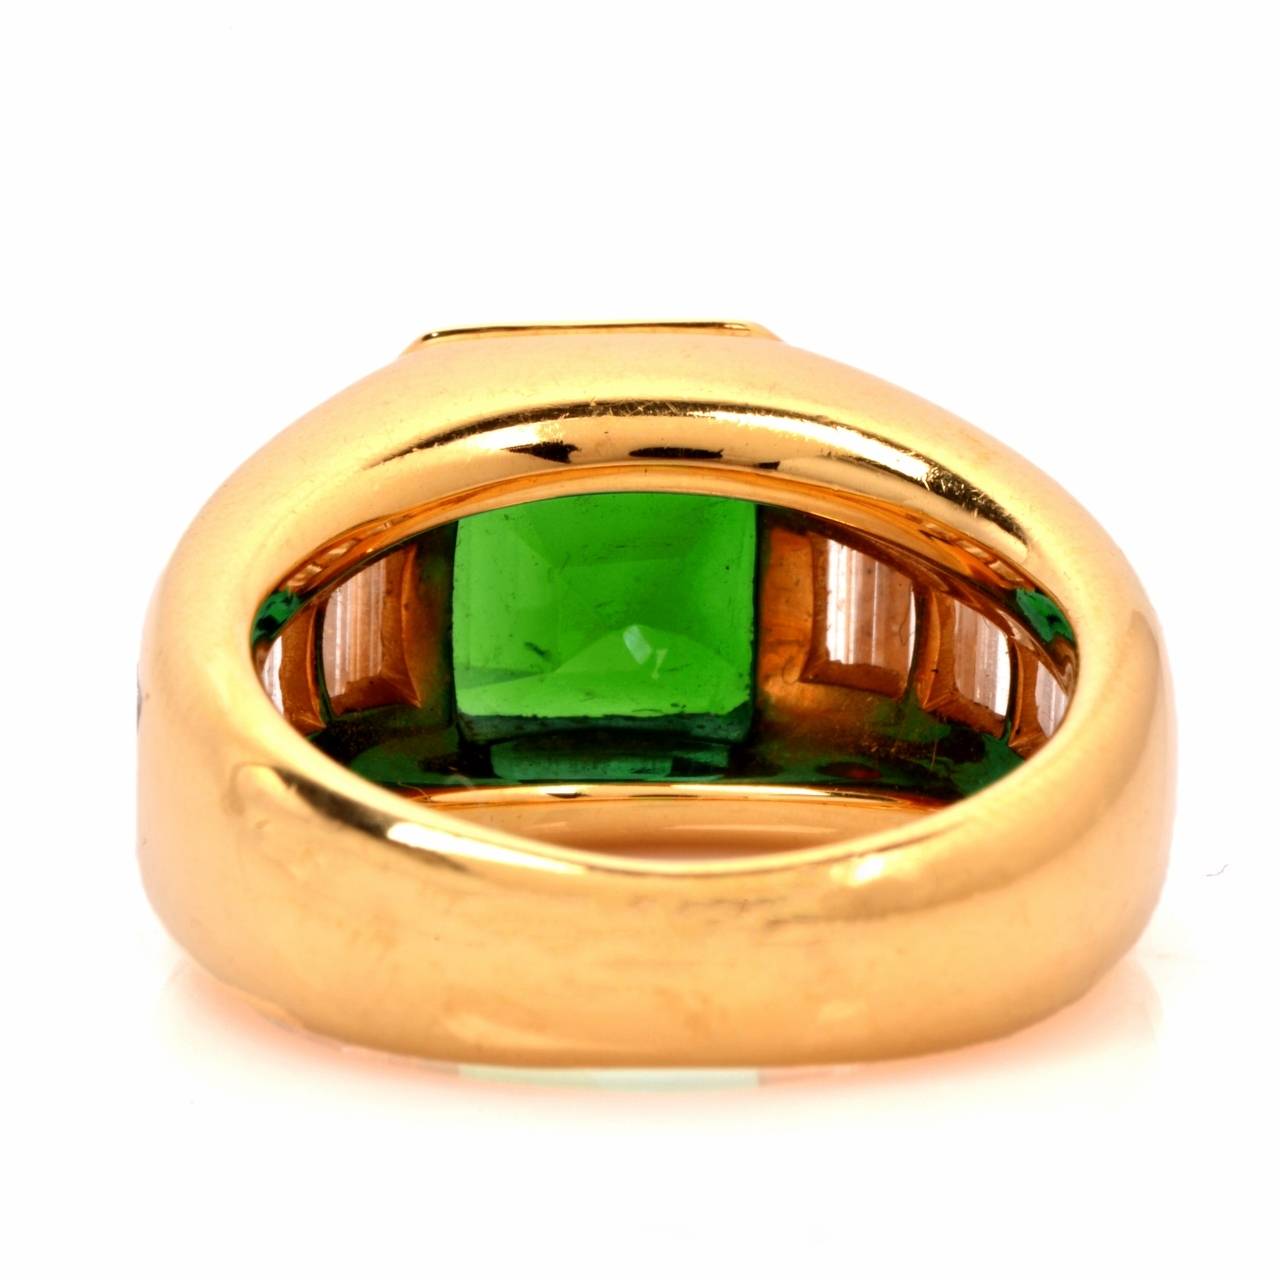 Tiffany & Co. GIA Certified Emerald Baguette Diamond Gold Ring 1